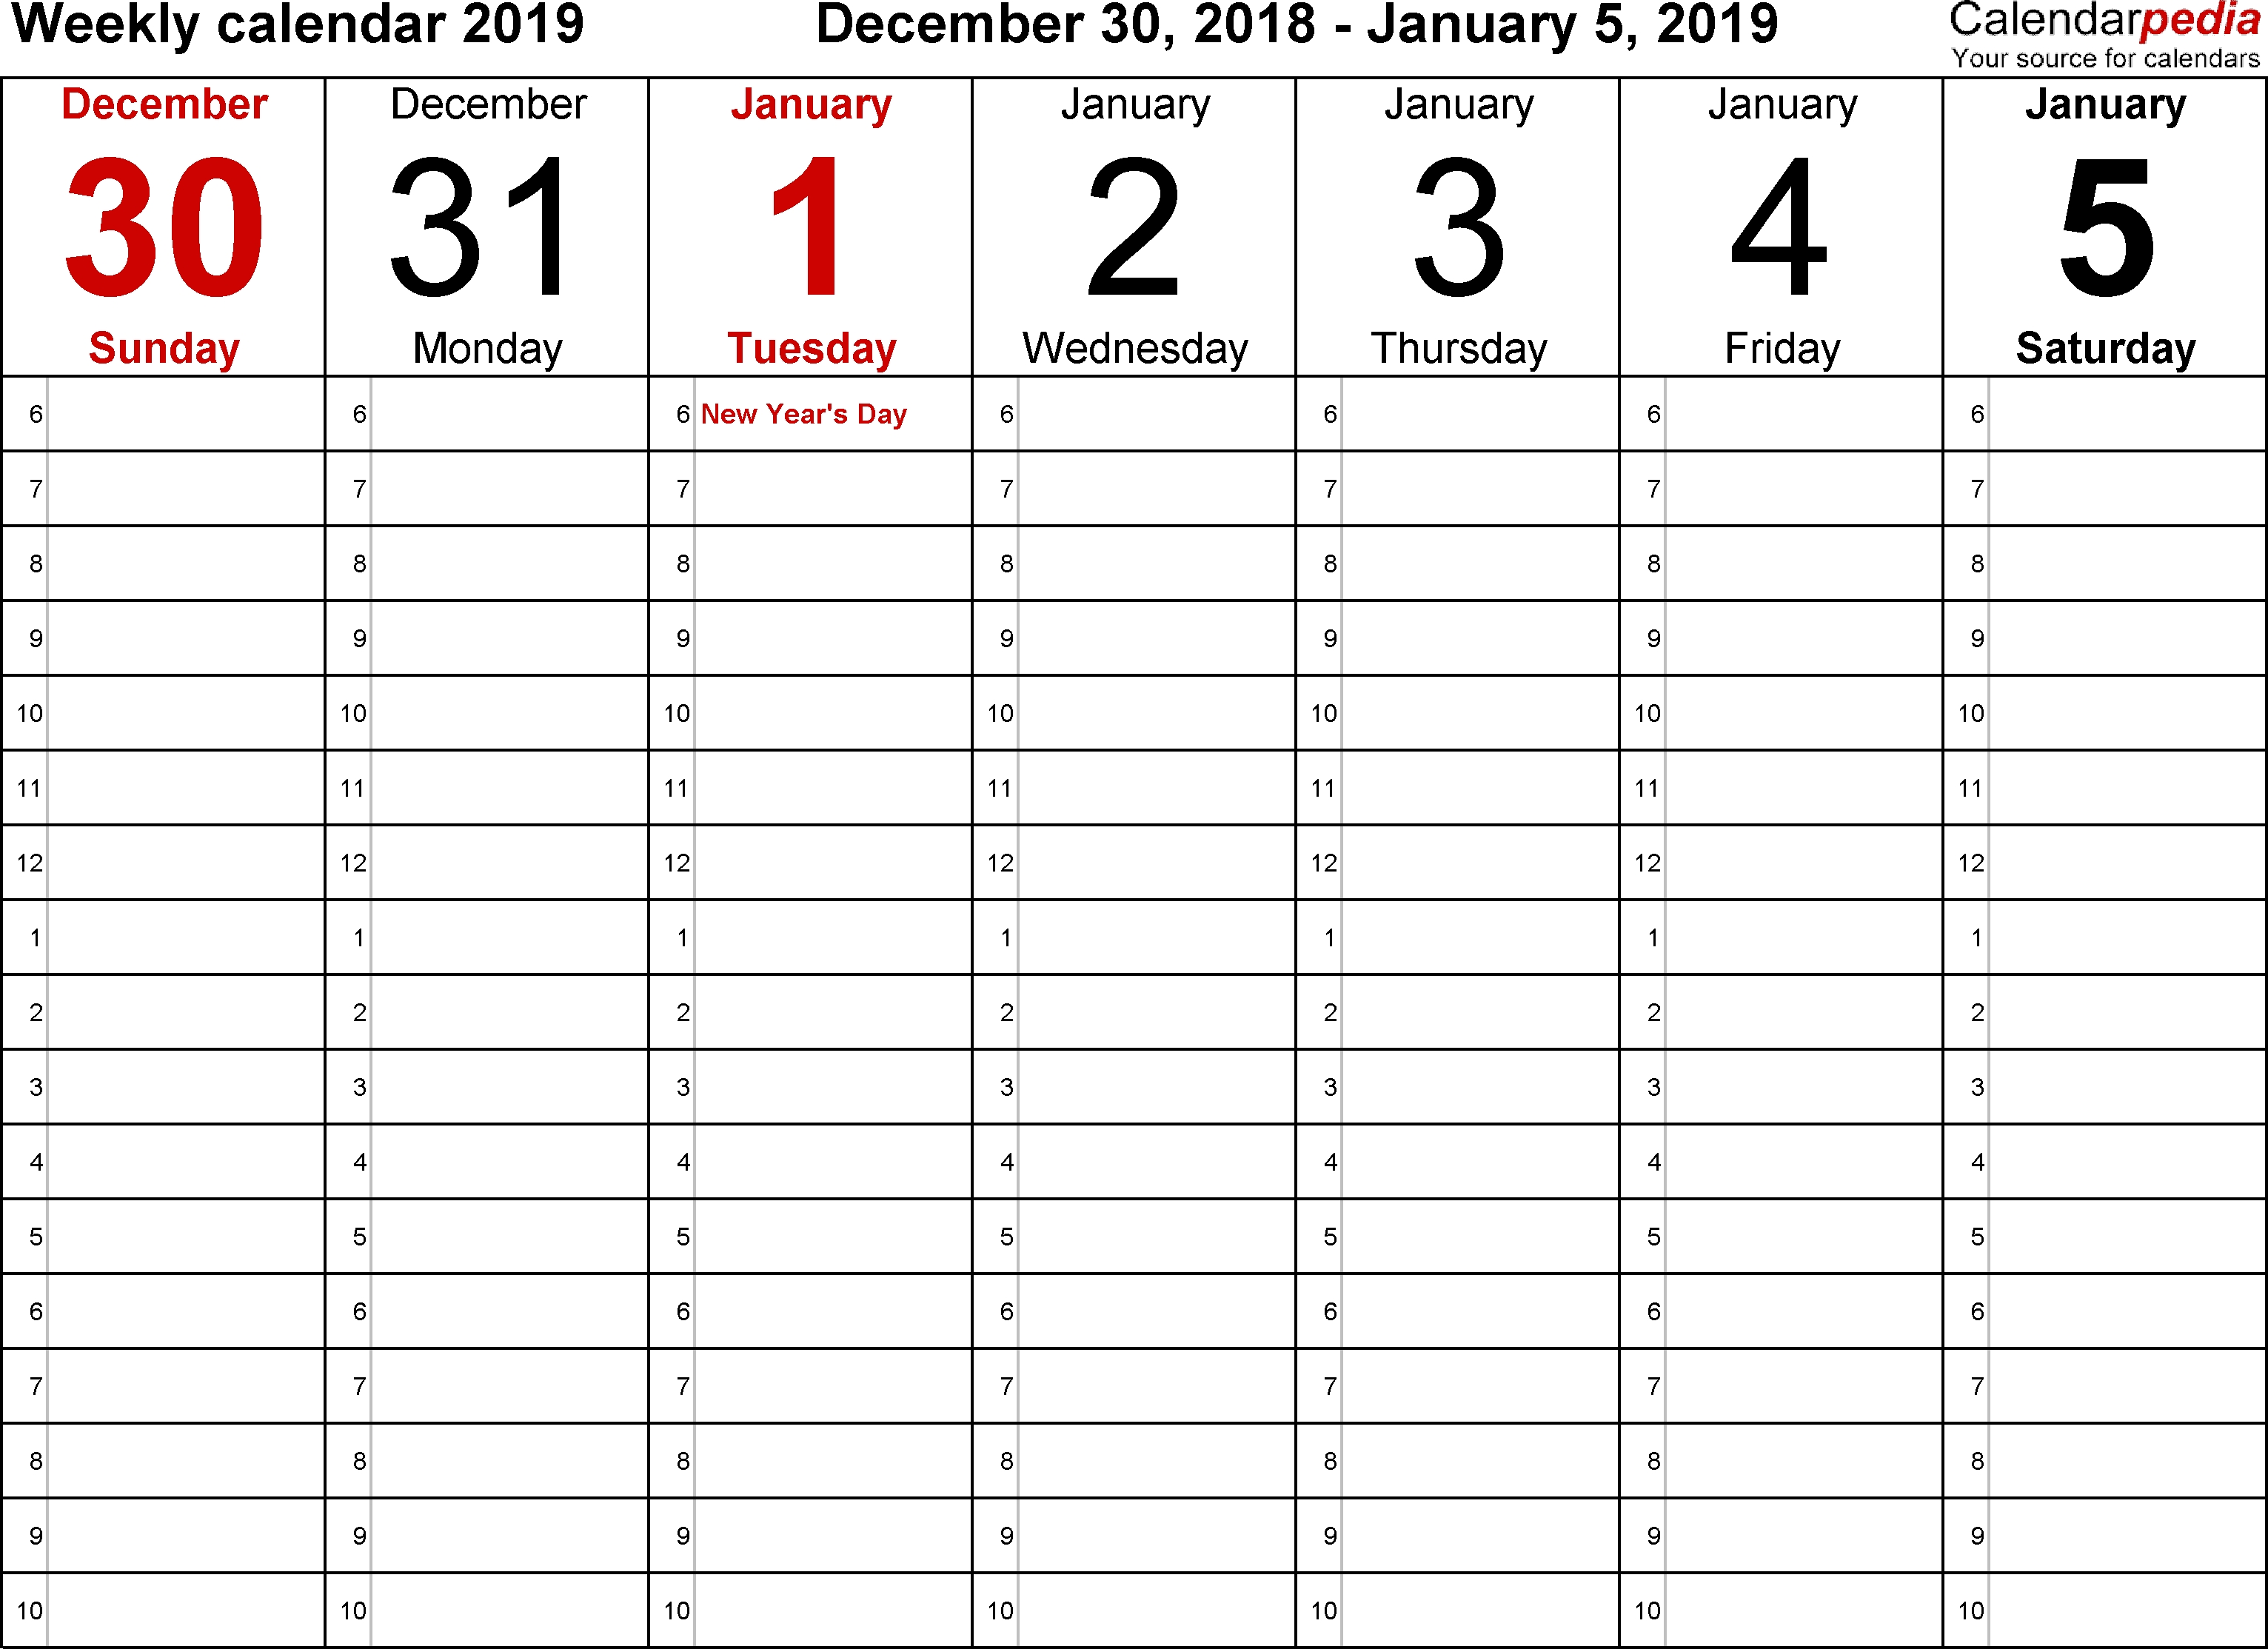 Blank Calendar With Times Weekly Es Free Printable Time Slots Daily intended for Free Printable Full Page Calendar With Time Slot